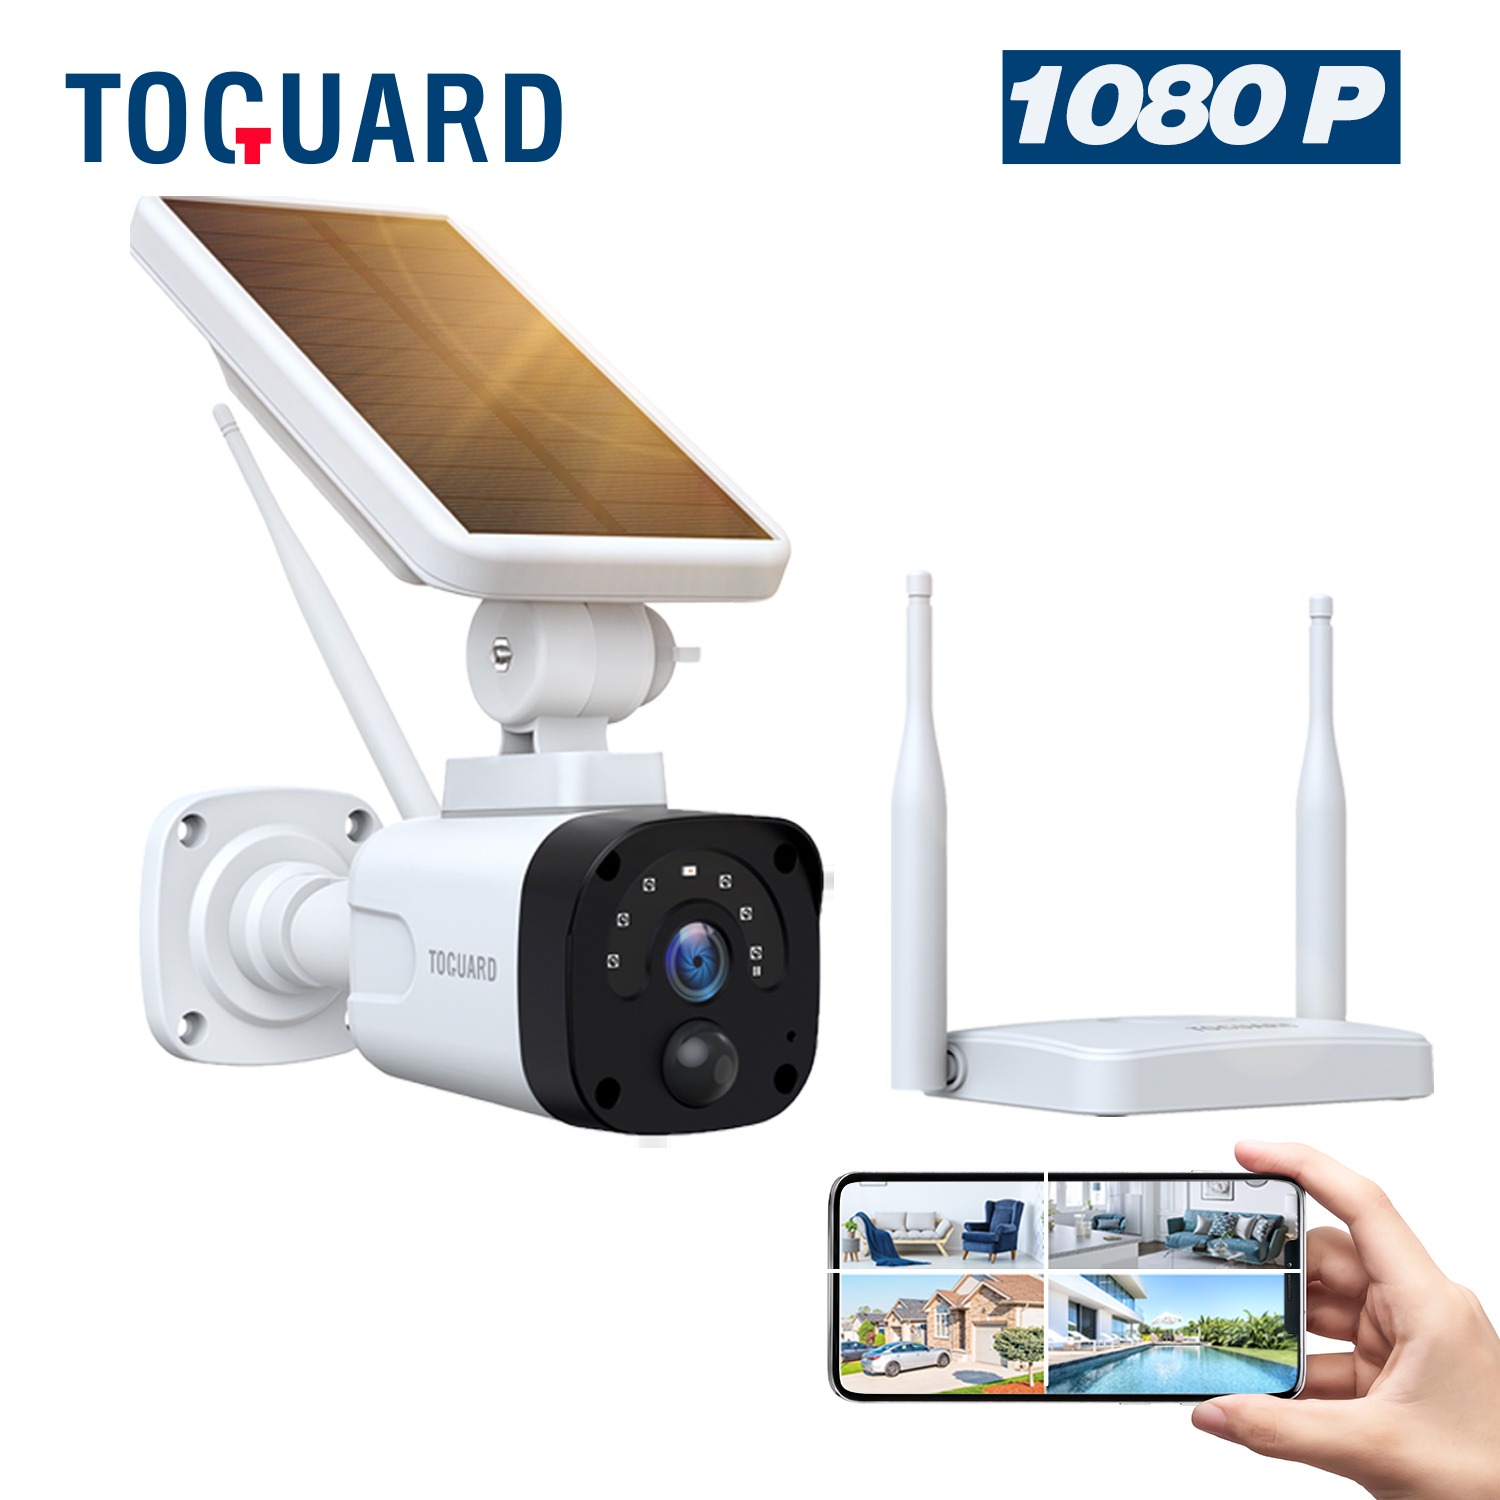 Toguard Solar Wireless Security Camera System Outdoor Battery WiFi Bullet Surveillance Camera Wireless Connector - image 1 of 8